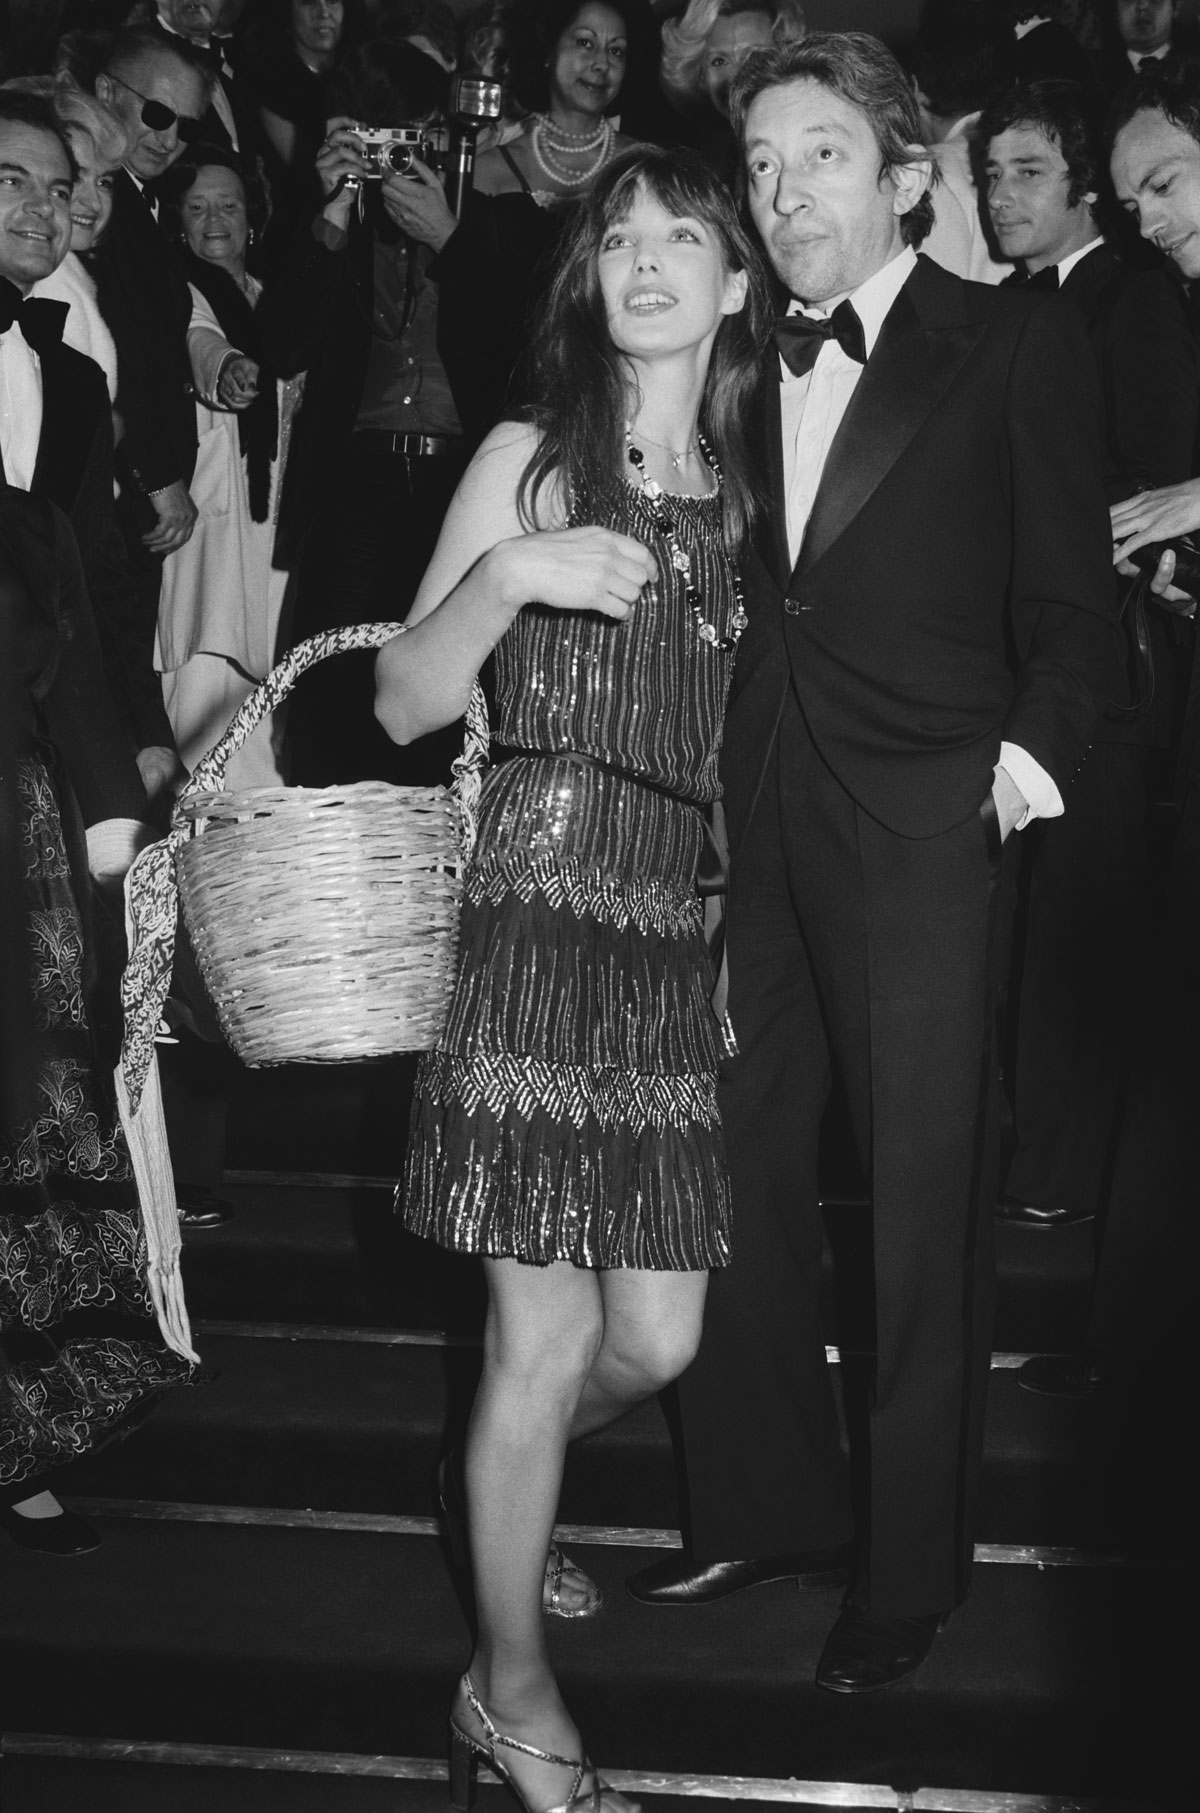 Jane Birkin wears a straw bucket bag and a flapper-style dress at the Cannes Film Festival.